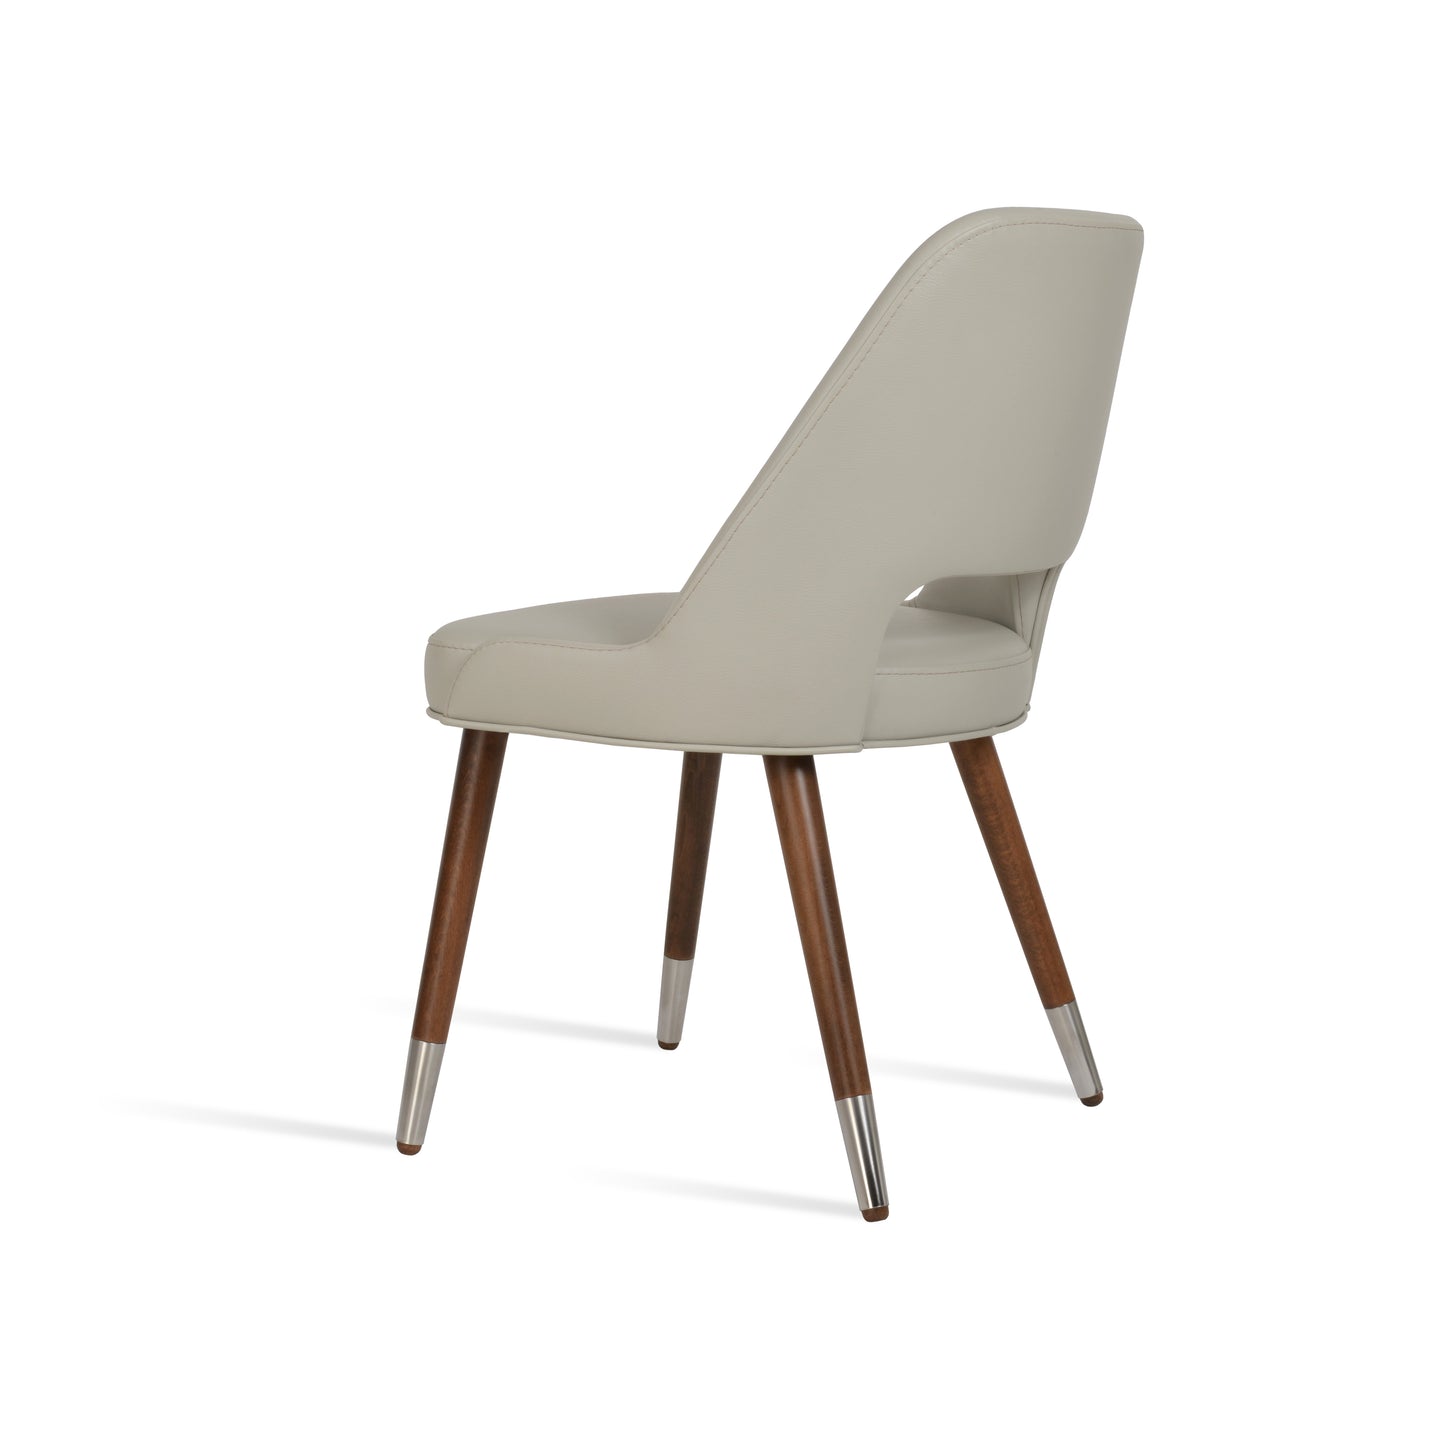 Contemporary Seating - Marash Wood Dining Chair"